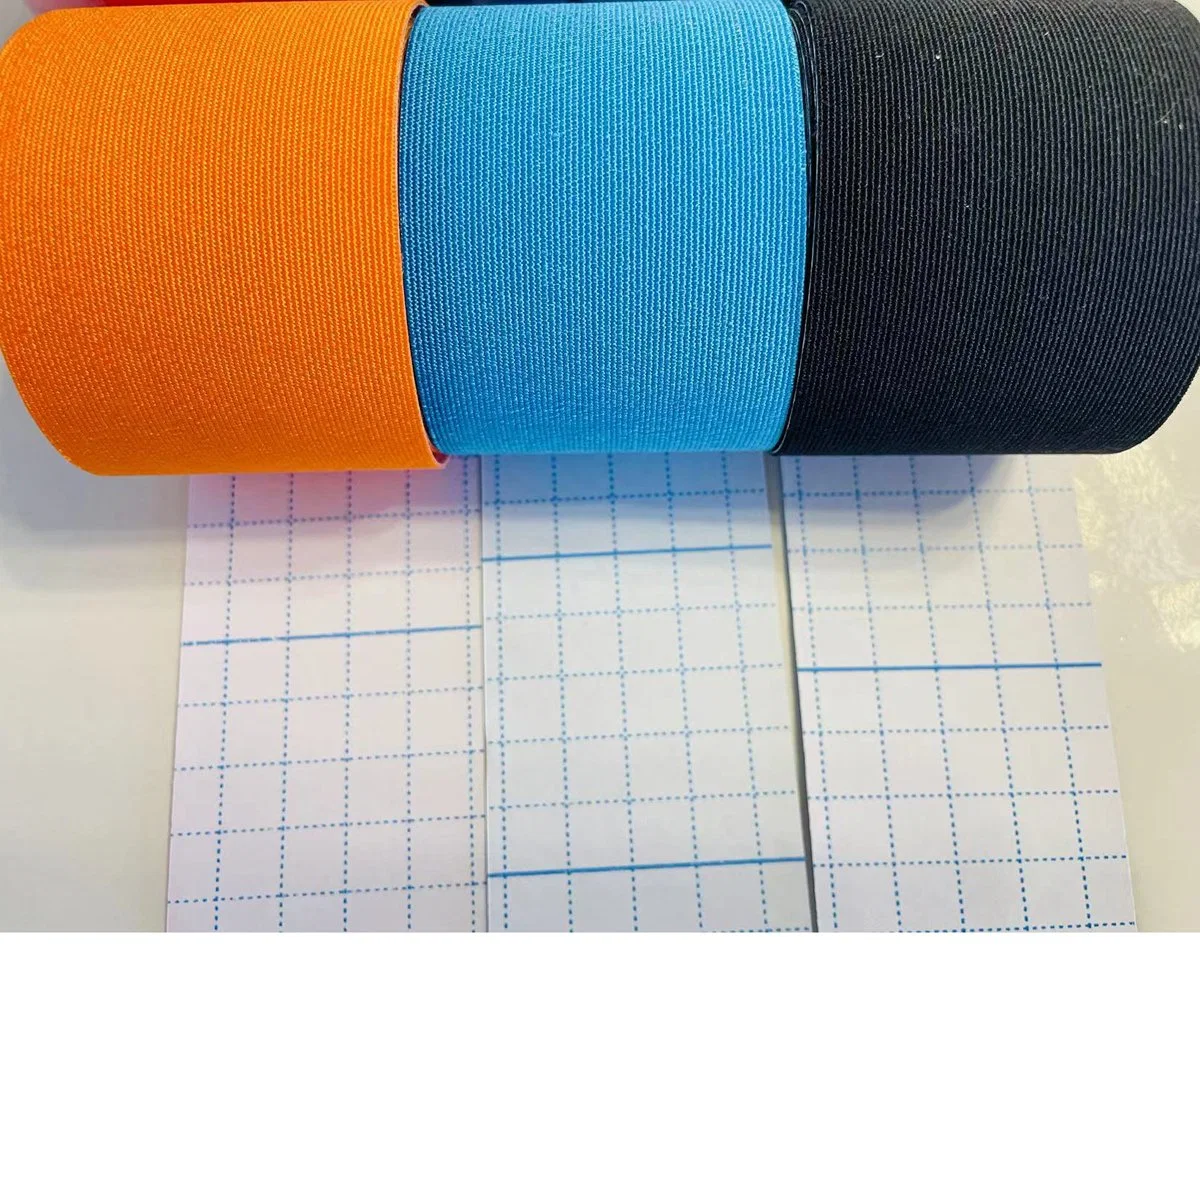 Customized Tape Body Tape Cotton Tape Synthetic Tape Kinesiology Tape Muscle Tape Face Tape Chest Life Tape